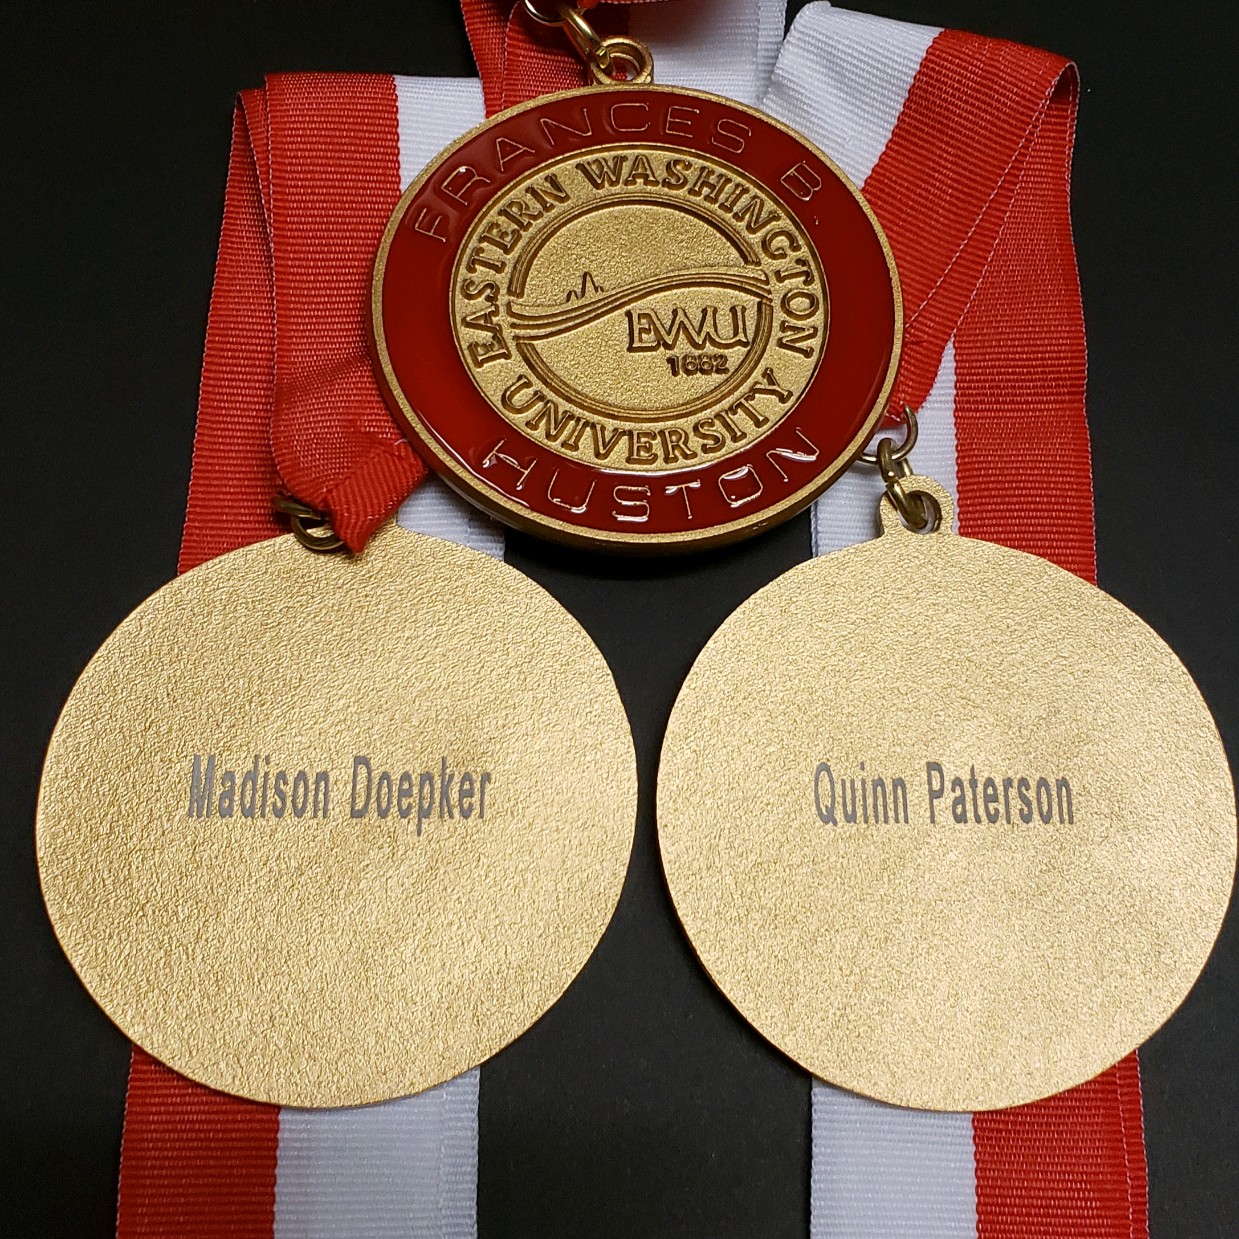 Frances B. Huston medallions engraved with the names Madison Doepker and Quinn Paterson